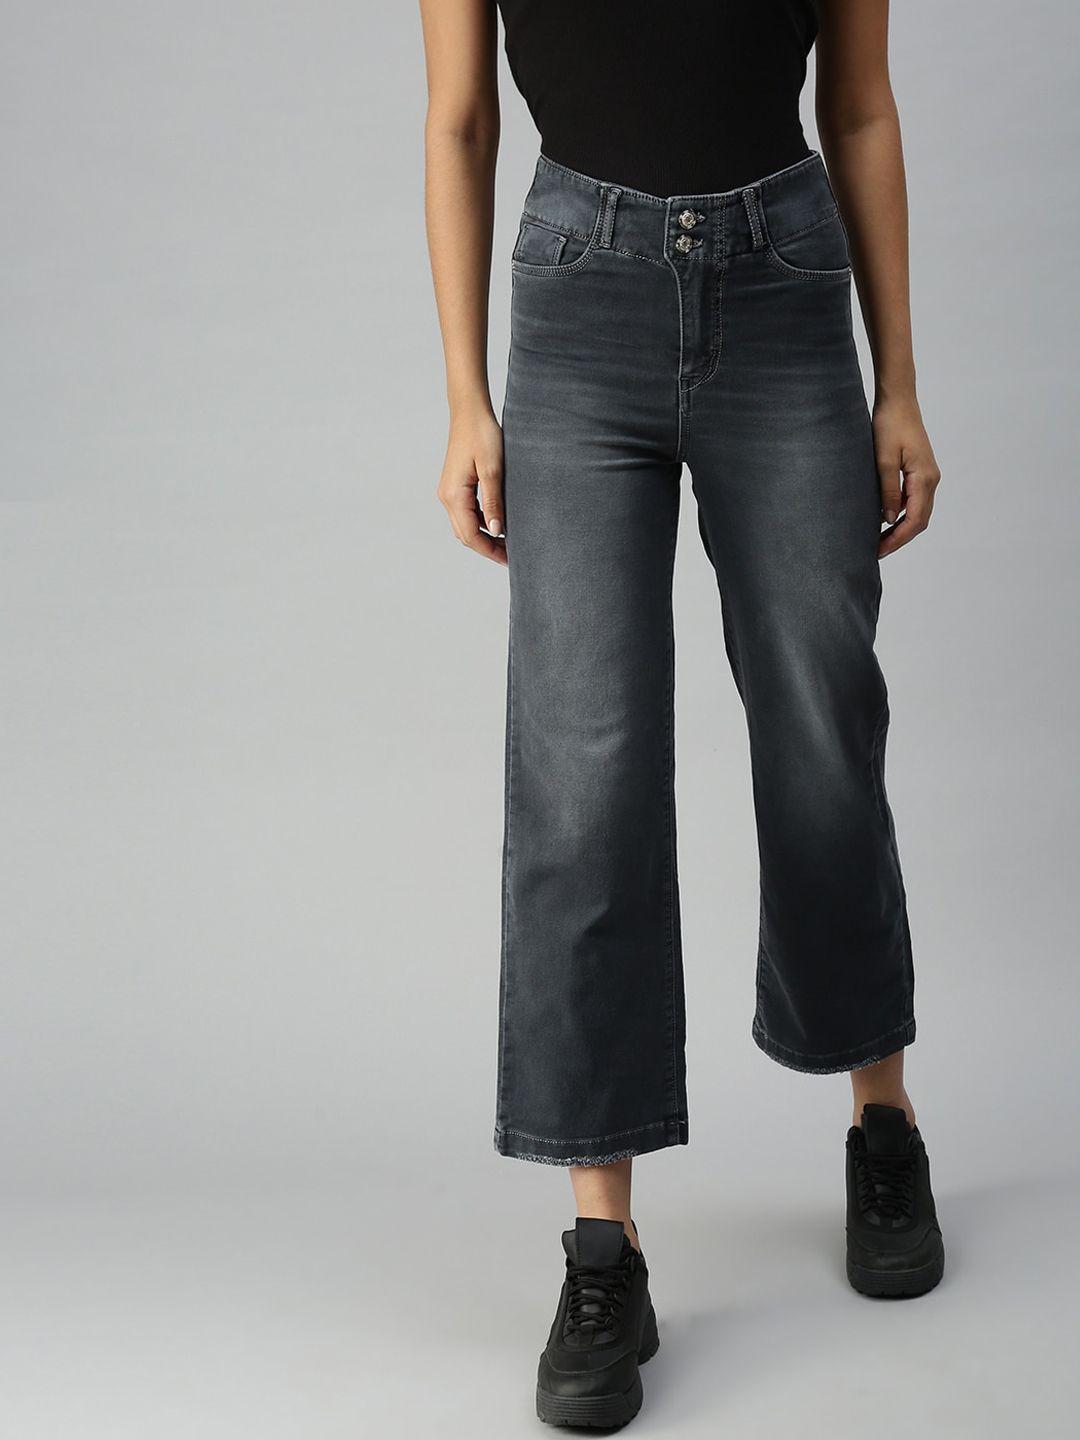 showoff-women-grey-jean-wide-leg-high-rise-light-fade-stretchable-jeans